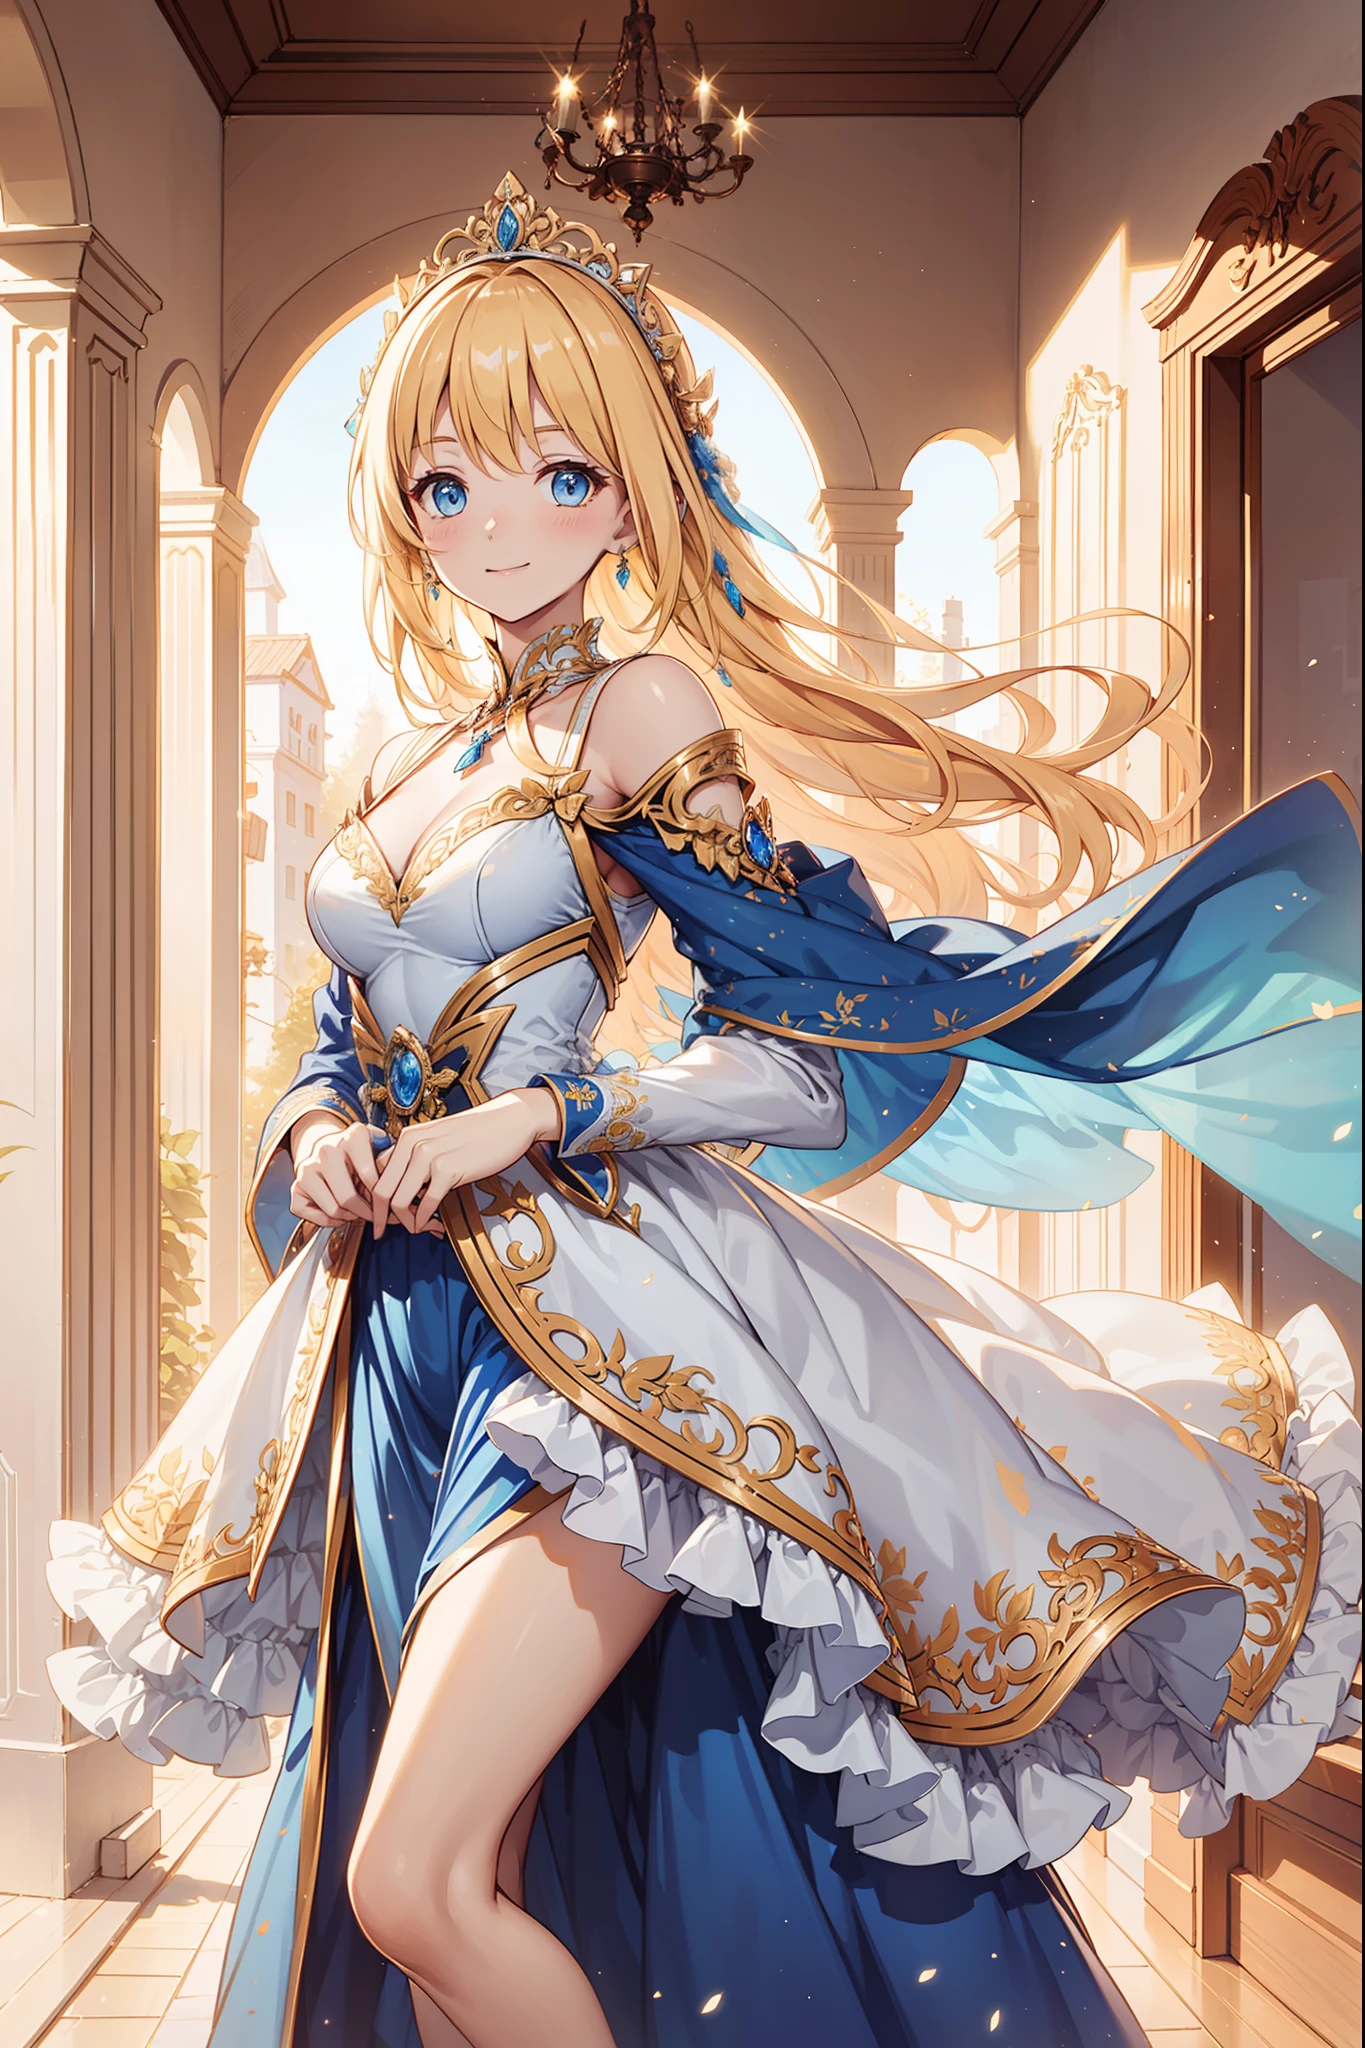 teens girl，Enchanted，Divine happiness，Being in love，(Yellow and white court dress dress)，blond hairbl，eBlue eyeaximalism，Multiple layers of delicate ruffles，Lots of lace，Delicate embroidery，Delicate pattern，Fabric headdress，exquisite costumes，Princess Crown，see-through transparent clothes，A small number of dark blue-white patterns，Beautiful detailed face，Bedroom scene in Western mythology，the night，Movie lighting，the night，solo person，(Flowing skirt:1.1)，metal decoration，Lace， (Shine:1.2), (Best quality), (Masterpiece:1.2),